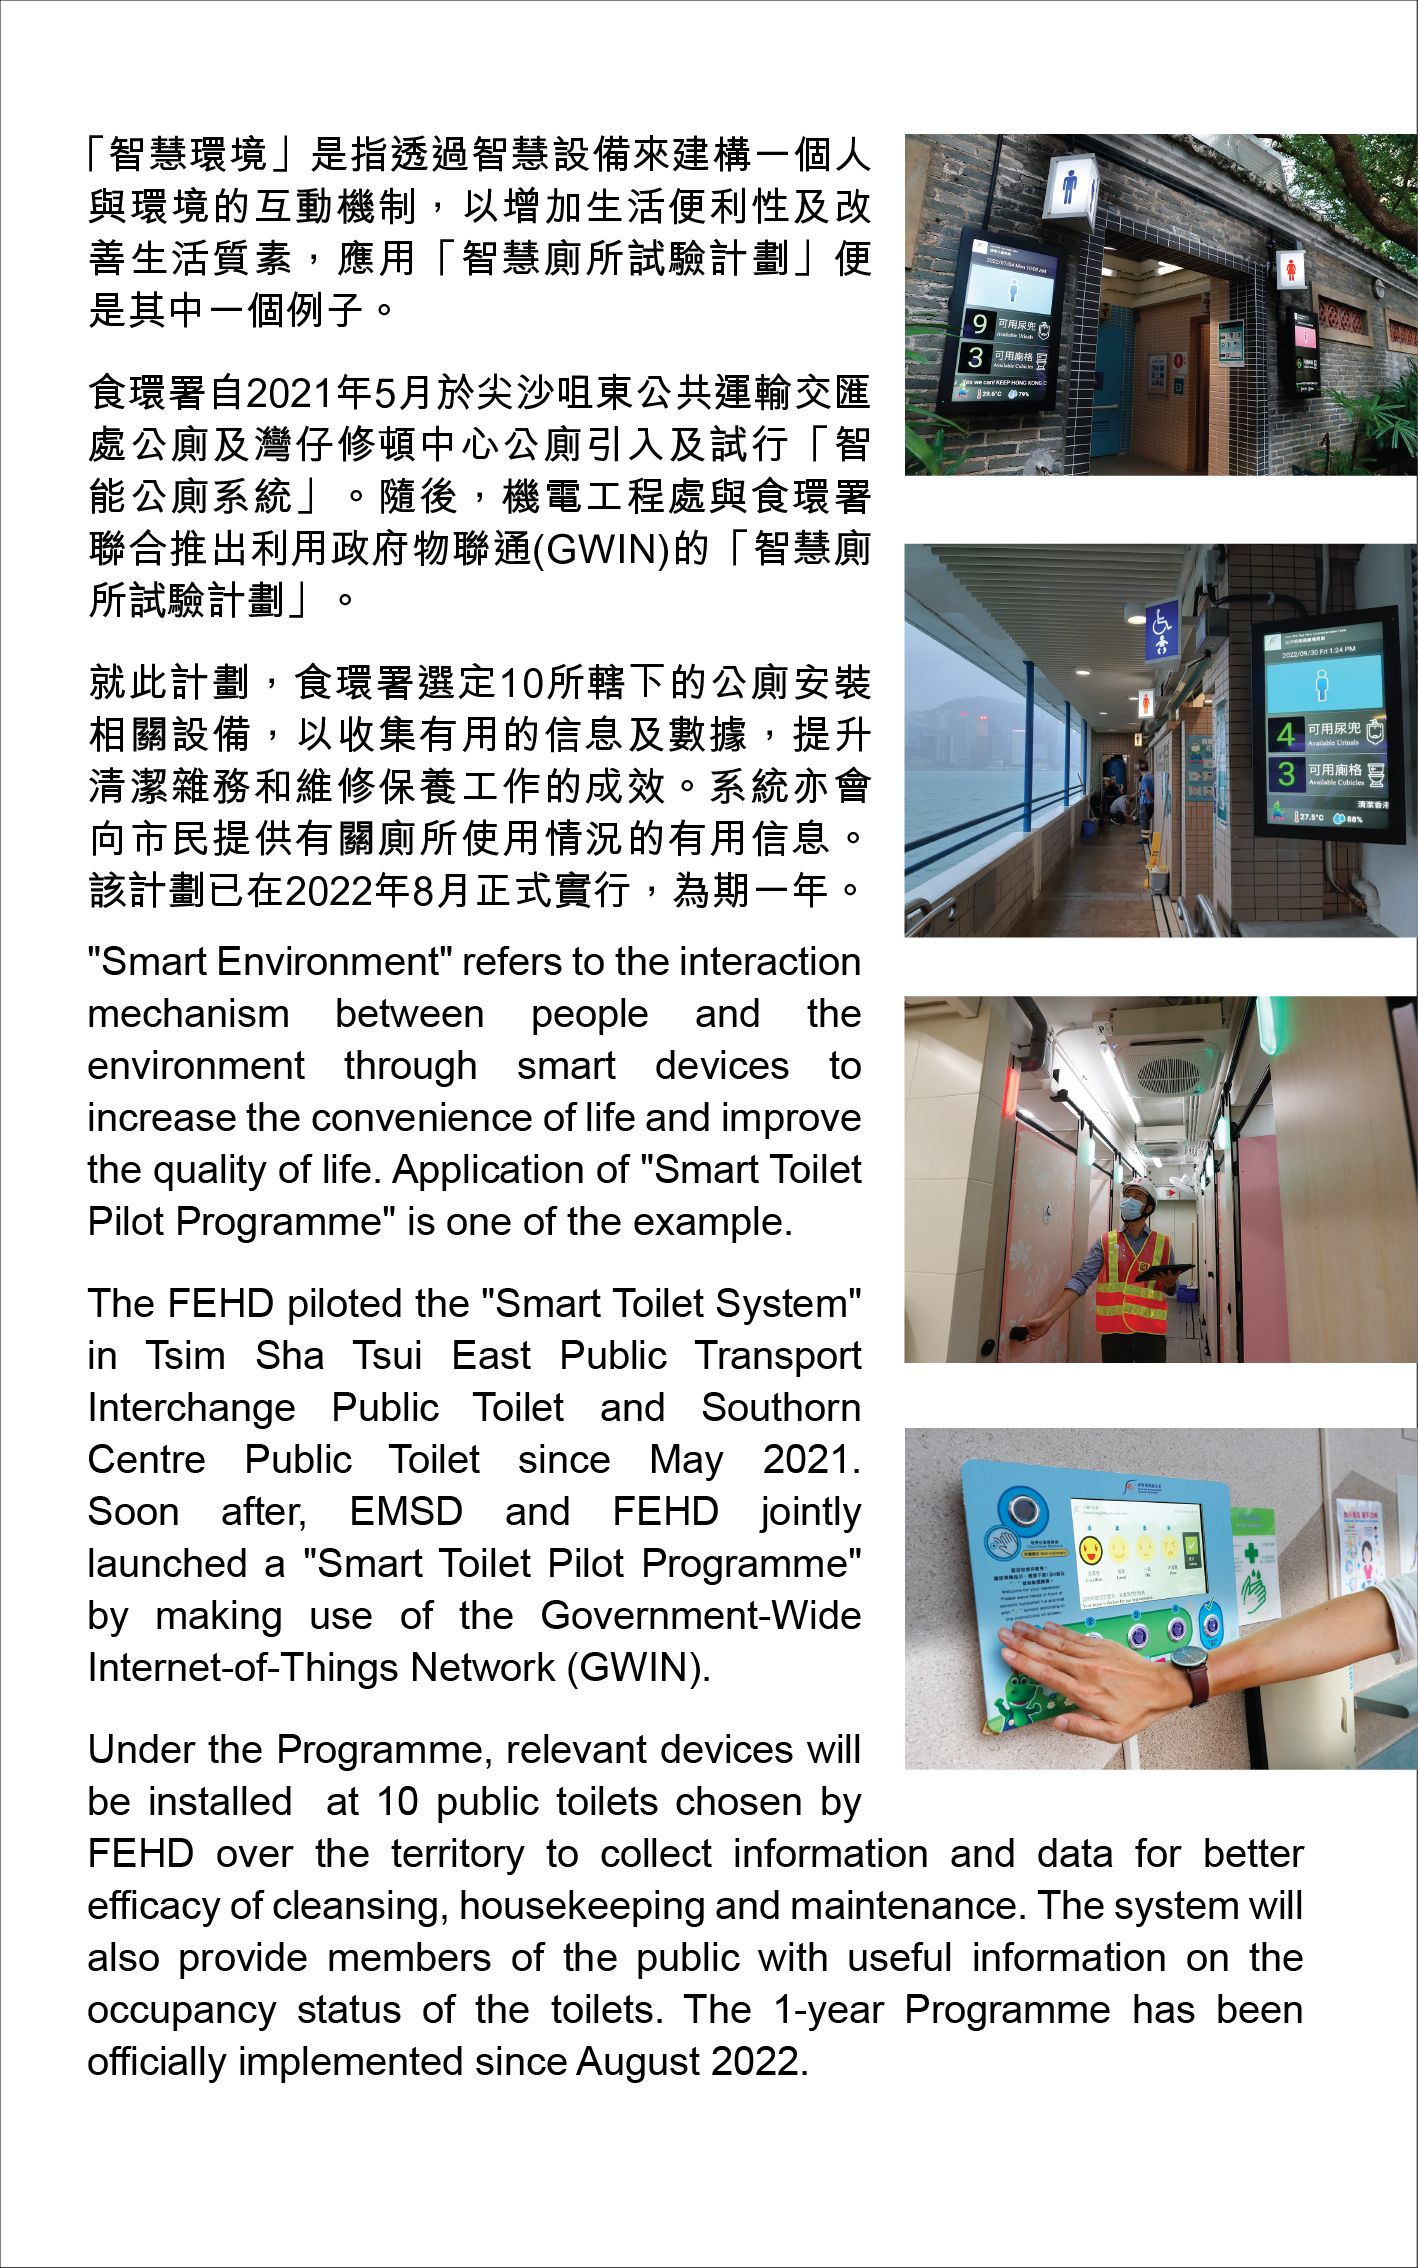 "Smart Environment" refers to the interaction mechanism between people and theenvironment through smart devices toincrease the convenience of life and improve the quality of life. Application of "Smart Toilet Pilot Programme" is one of the example. The FEHD piloted the "Smart Toilet System" in Tsim Sha Tsui East Public TransportInterchange Public Toilet and Southorn Centre Public Toilet since May 2021. Soon after, EMSD and FEHD jointly launched a "Smart Toilet Pilot Programme" by making use of the Government-WideInternet-of-Things Network (GWIN). Under the Programme, relevant devices will be installed  at 10 public toilets chosen by FEHD over the territory to collect information and data for betterefficacy of cleansing, housekeeping and maintenance. The system will also provide members of the public with useful information on theoccupancy status of the toilets. The 1-year Programme has beenofficially implemented since August 2022.